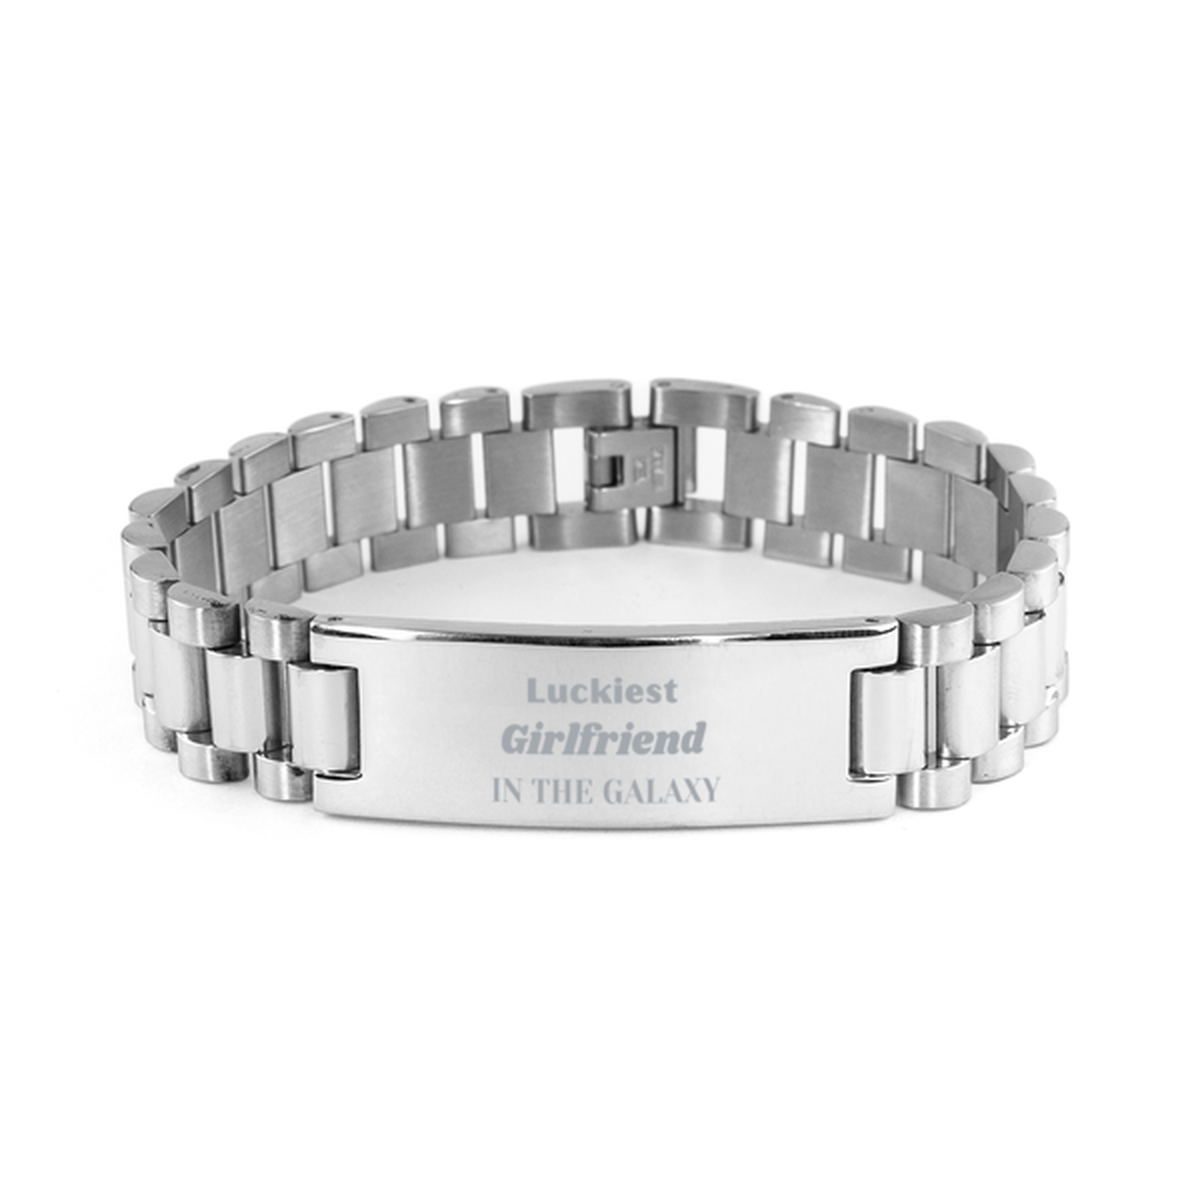 Luckiest Girlfriend in the Galaxy, To My Girlfriend Engraved Gifts, Christmas Girlfriend Ladder Stainless Steel Bracelet Gifts, X-mas Birthday Unique Gifts For Girlfriend Men Women